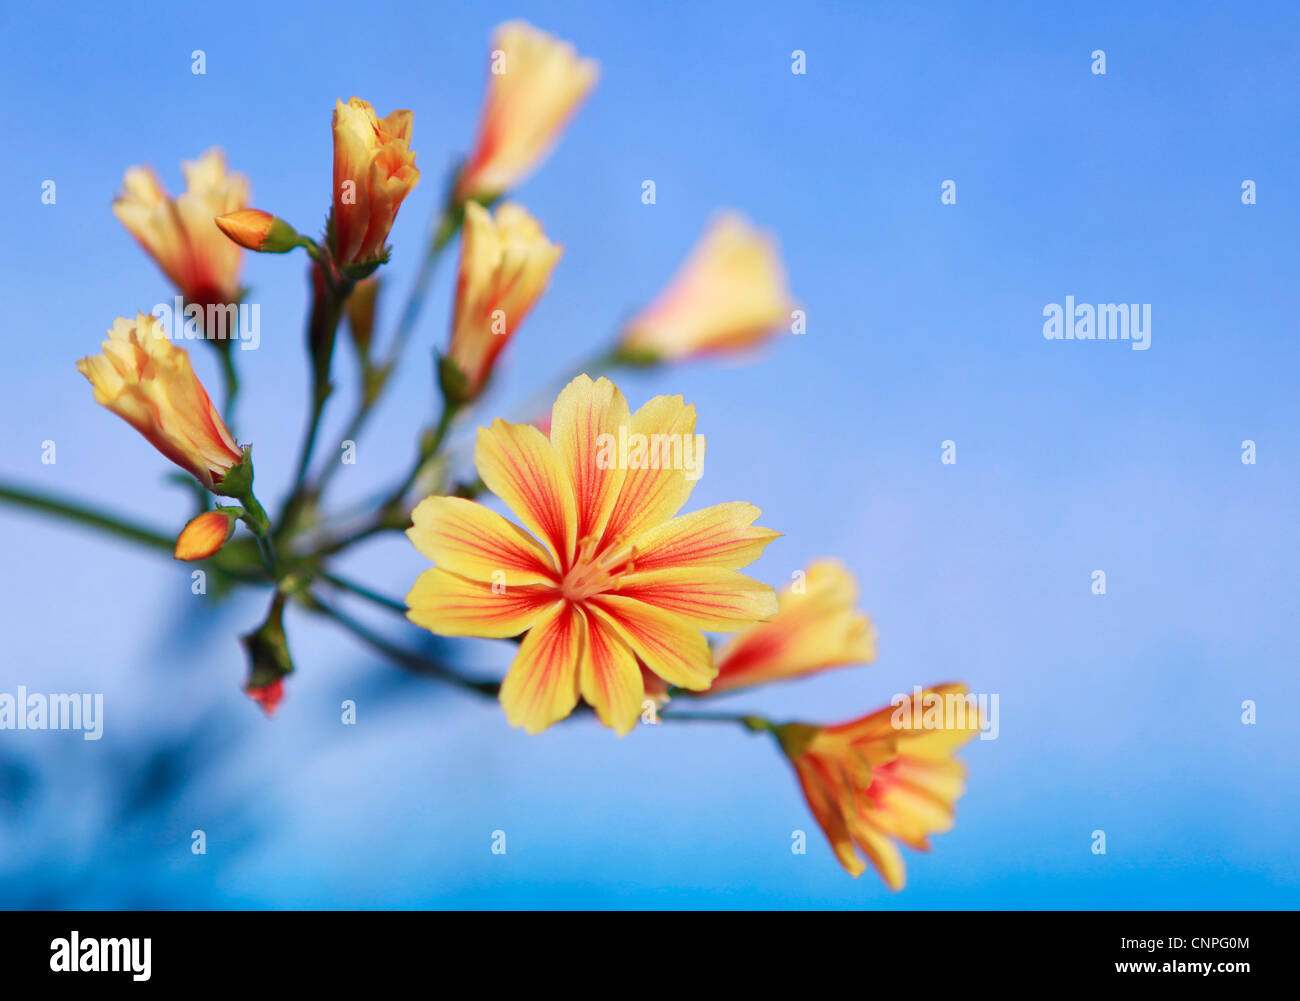 Lily Family. Decorative Spring flowers arranged on sky blue background Stock Photo